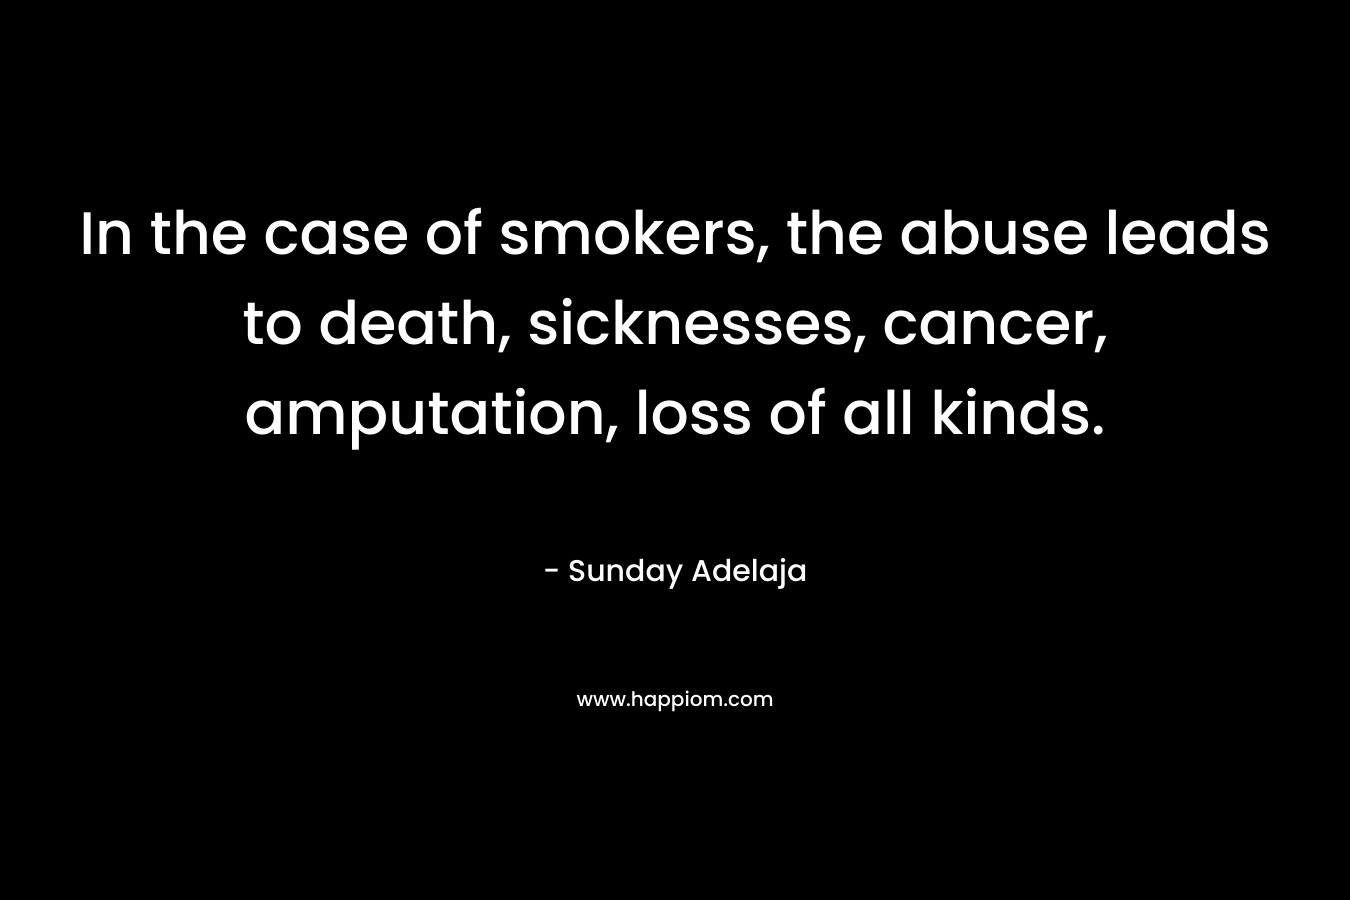 In the case of smokers, the abuse leads to death, sicknesses, cancer, amputation, loss of all kinds.